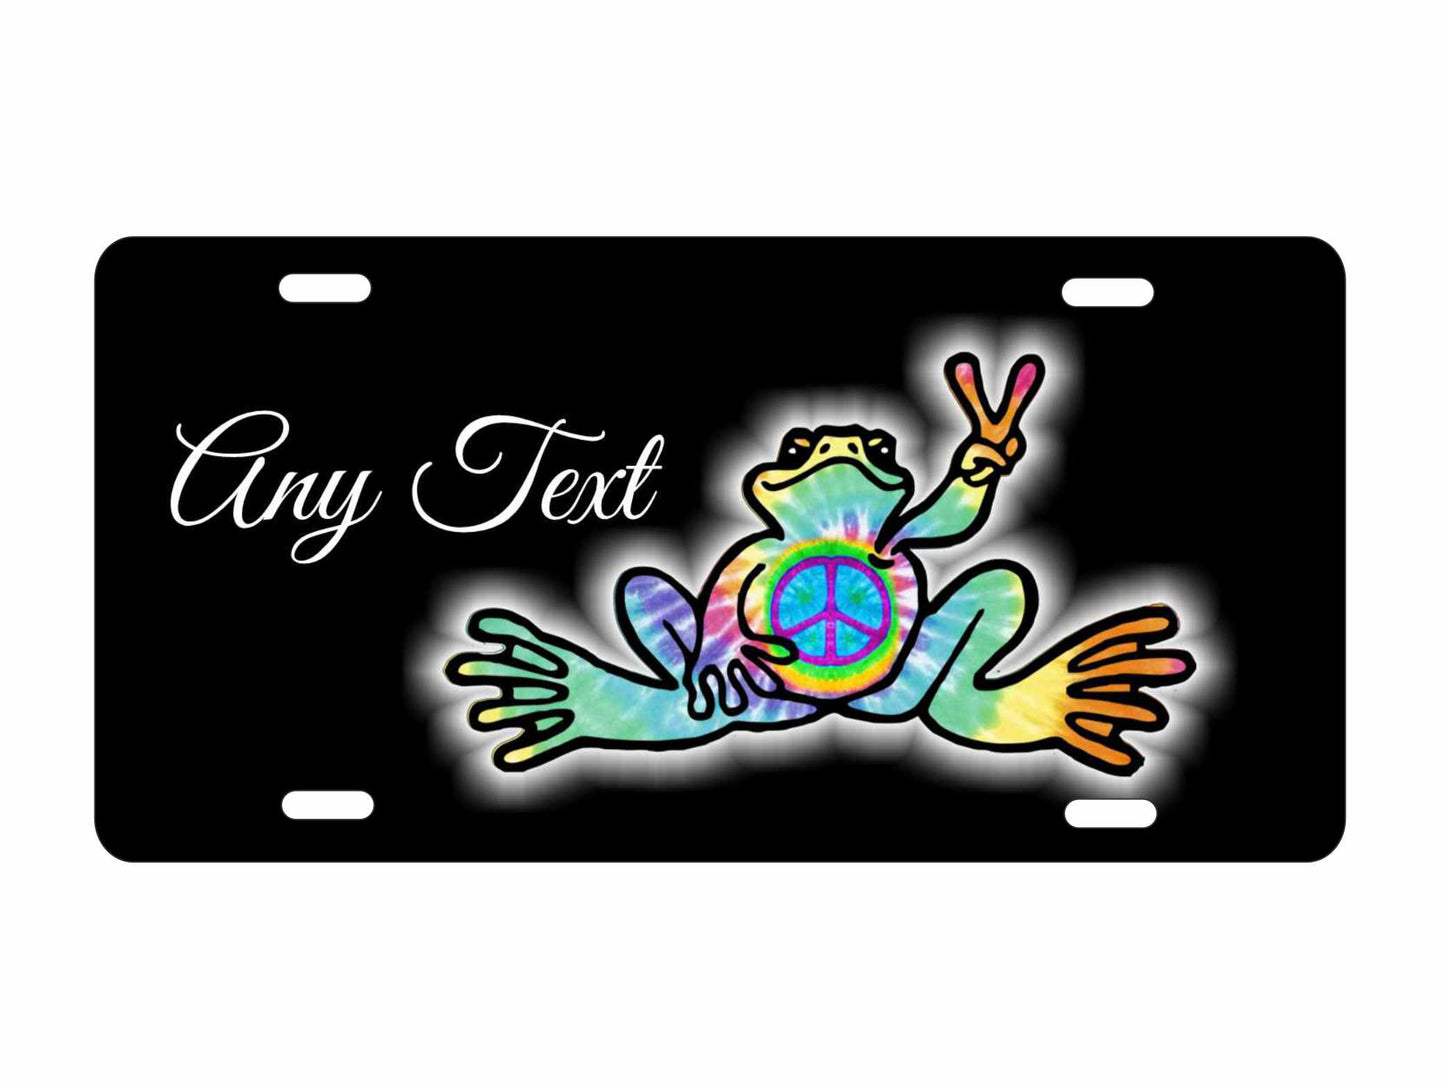 peace frog tiedye rainbow colors personalized novelty Front license plate custom Decorative vanity car tag